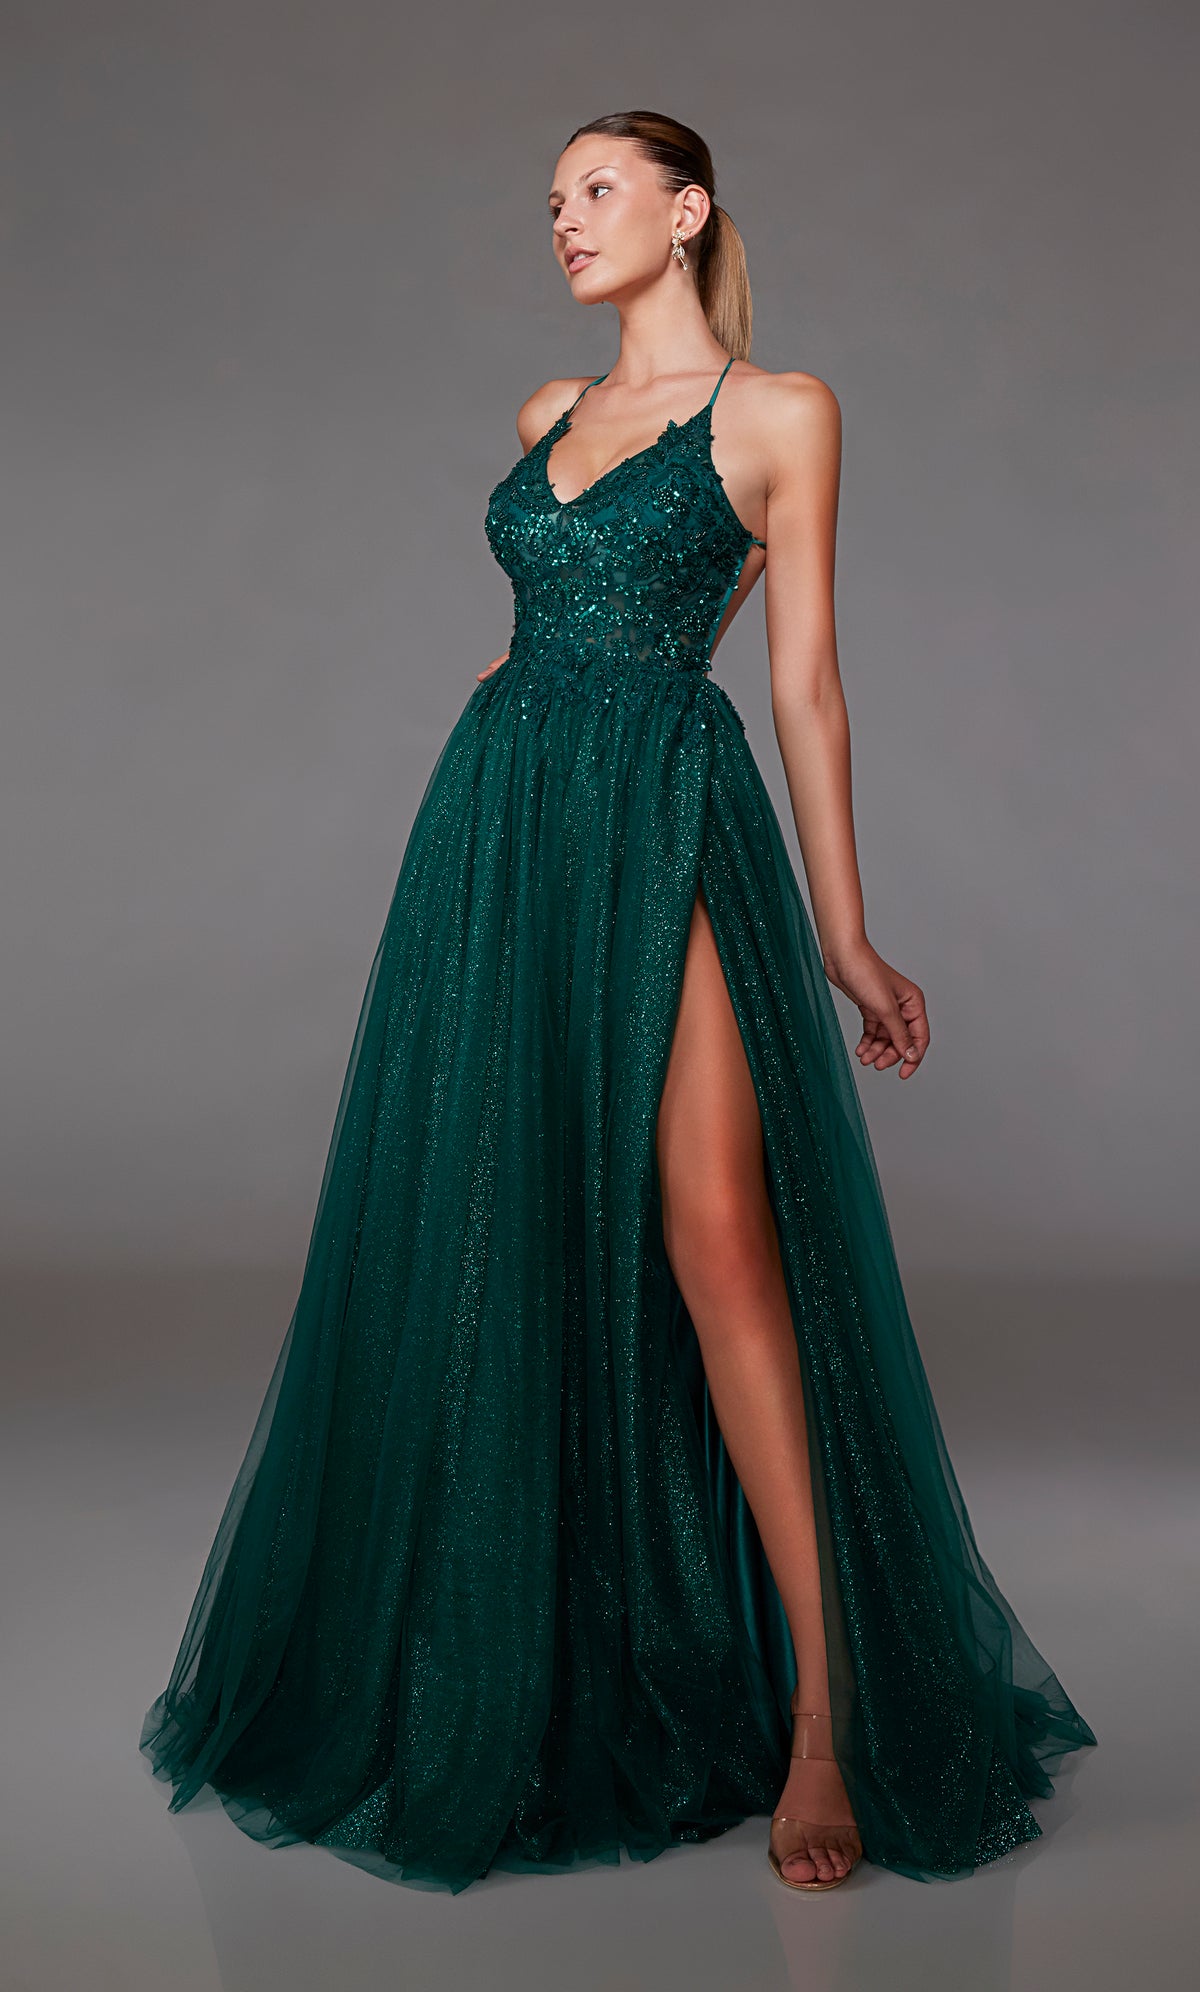 Green glitter tulle A-line prom dress: plunging V neckline, front slit, crisscross back straps, and train. A dazzling choice for an vibrant and stylish look.